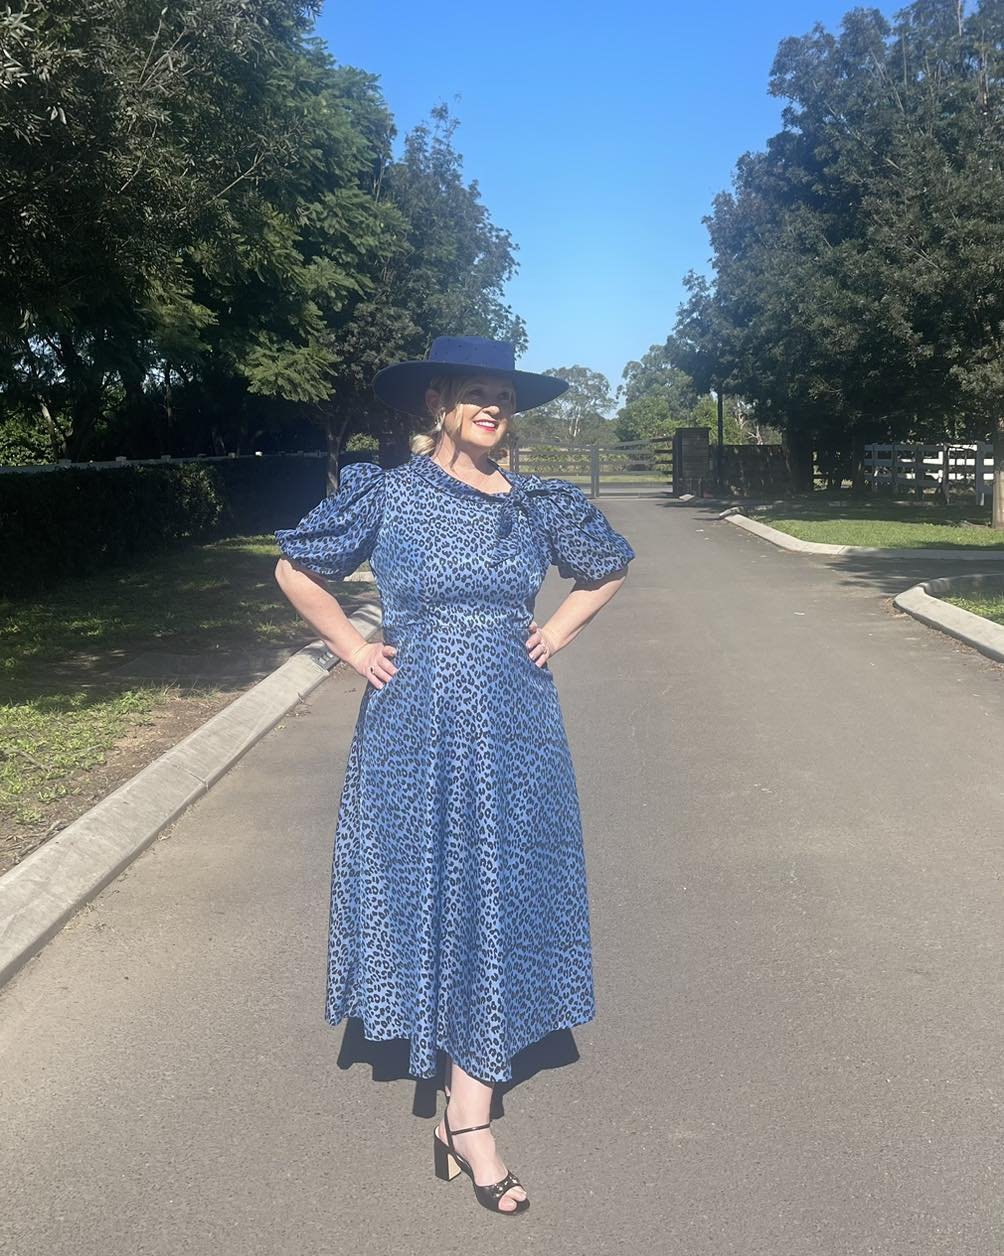 When the day calks for blue, you wear our MCD RTW 'Cheetah' dress. 

Milissa looking absolutely stunning for today's Australian Turf Club Queen Elizabeth Stakes Blue Race Day. 

Love receiving photos from my clients and bringing their MCD dresses to 